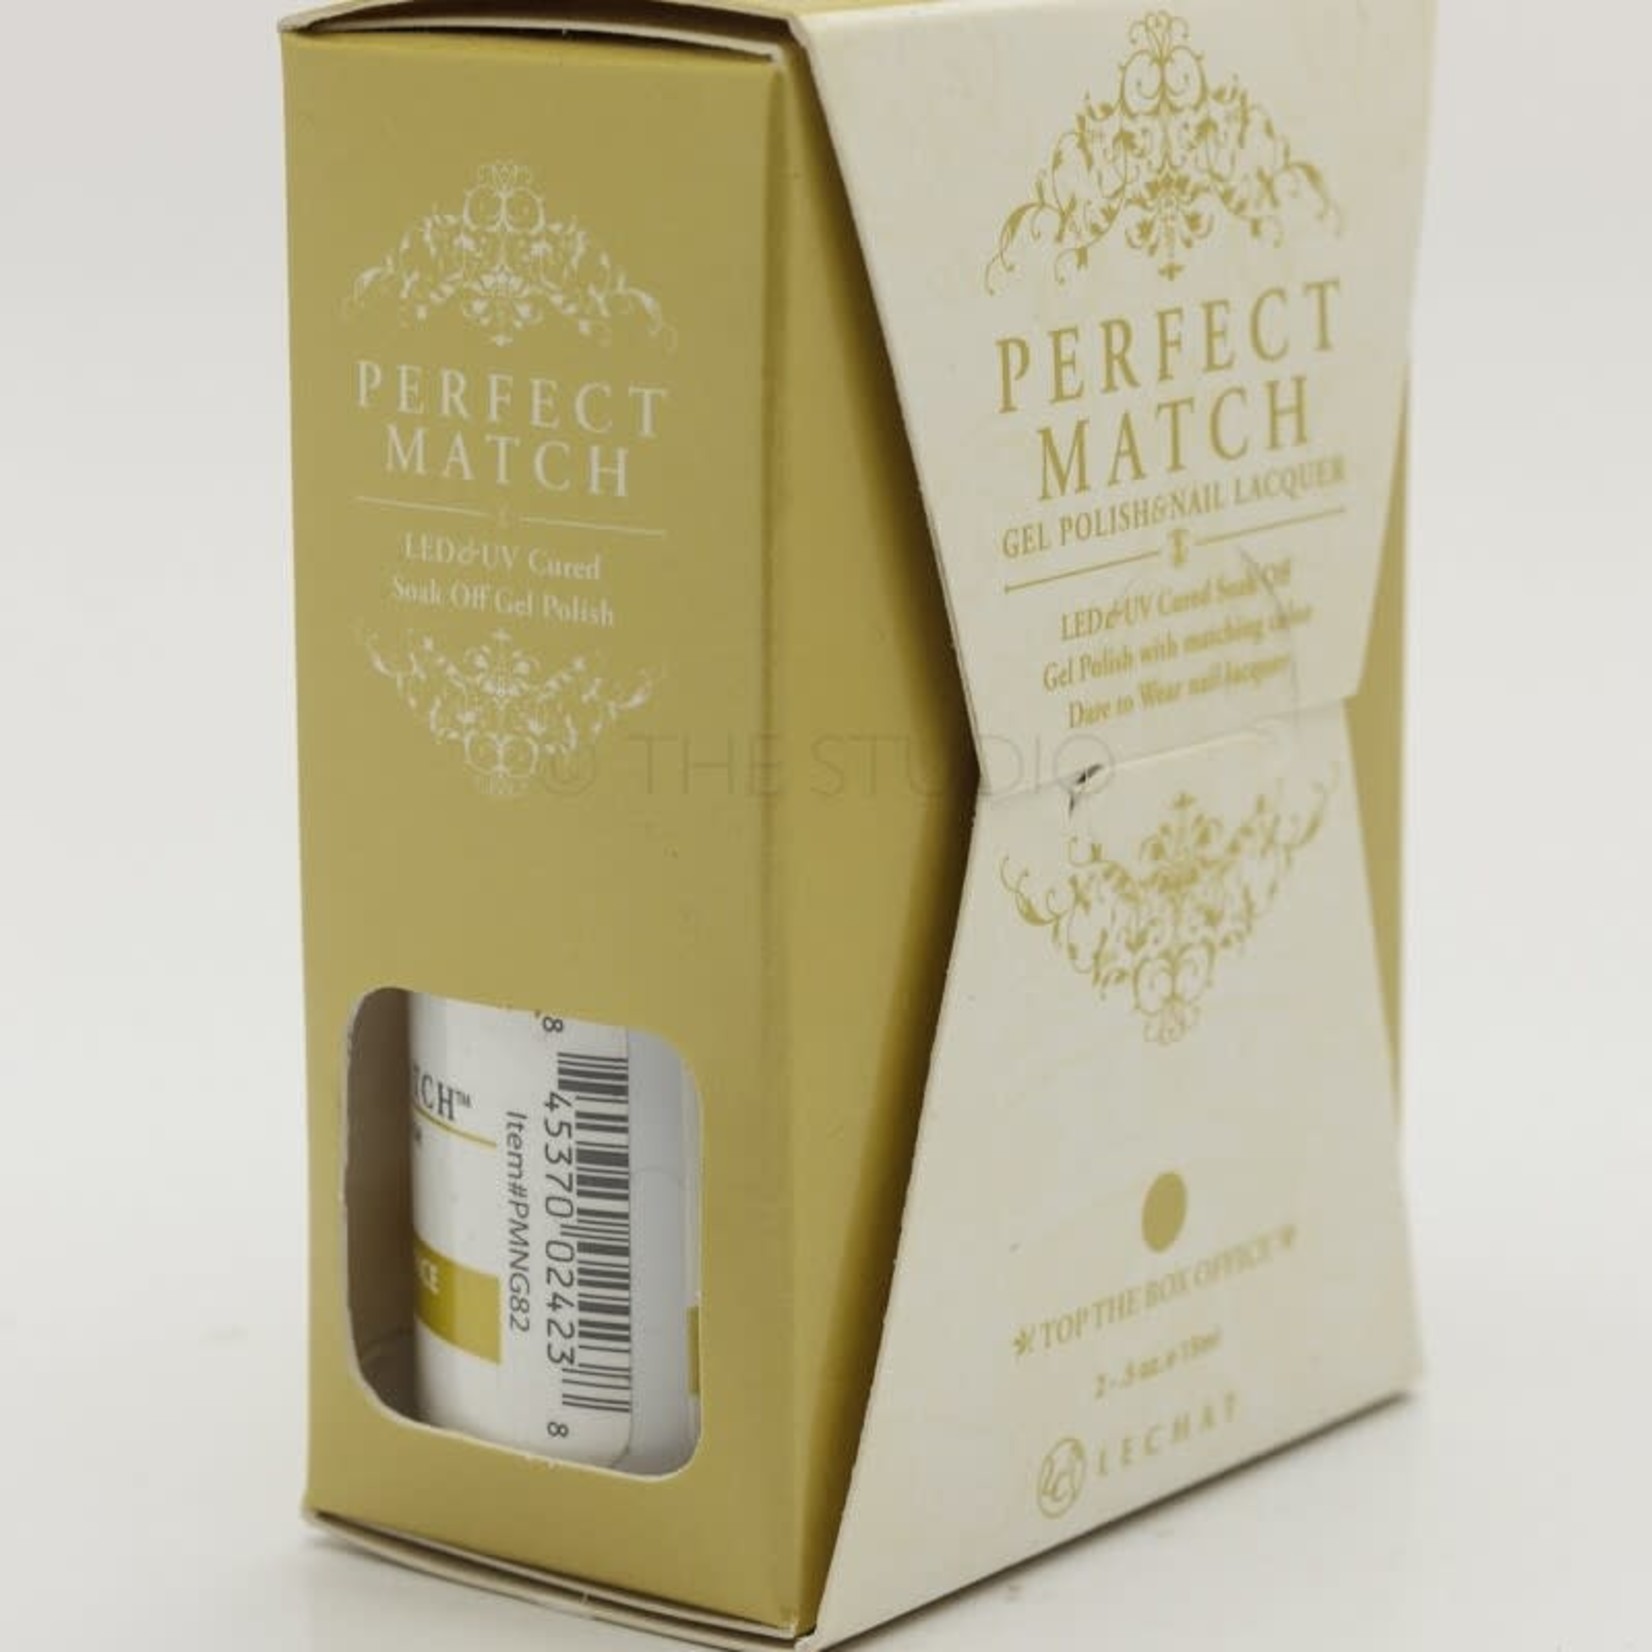 LeChat *SALE* Perfect Match - 082 - DUO Polish - Top The Box Office